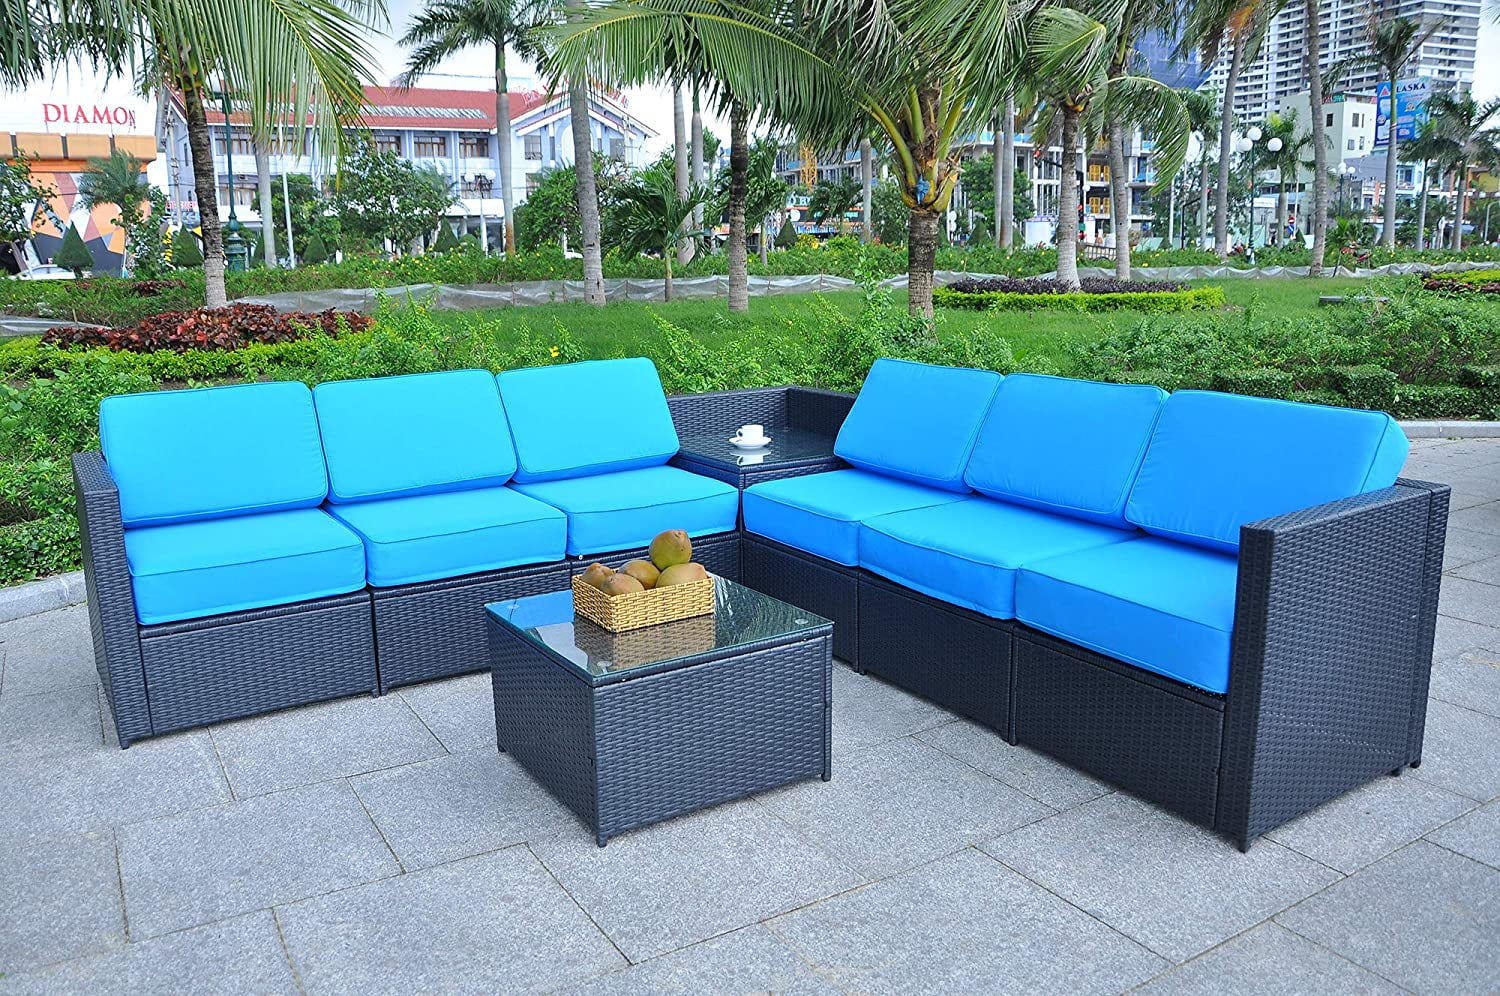 Mcombo Outdoor Patio Furniture Sectional Set Wicker Conversation Sofas